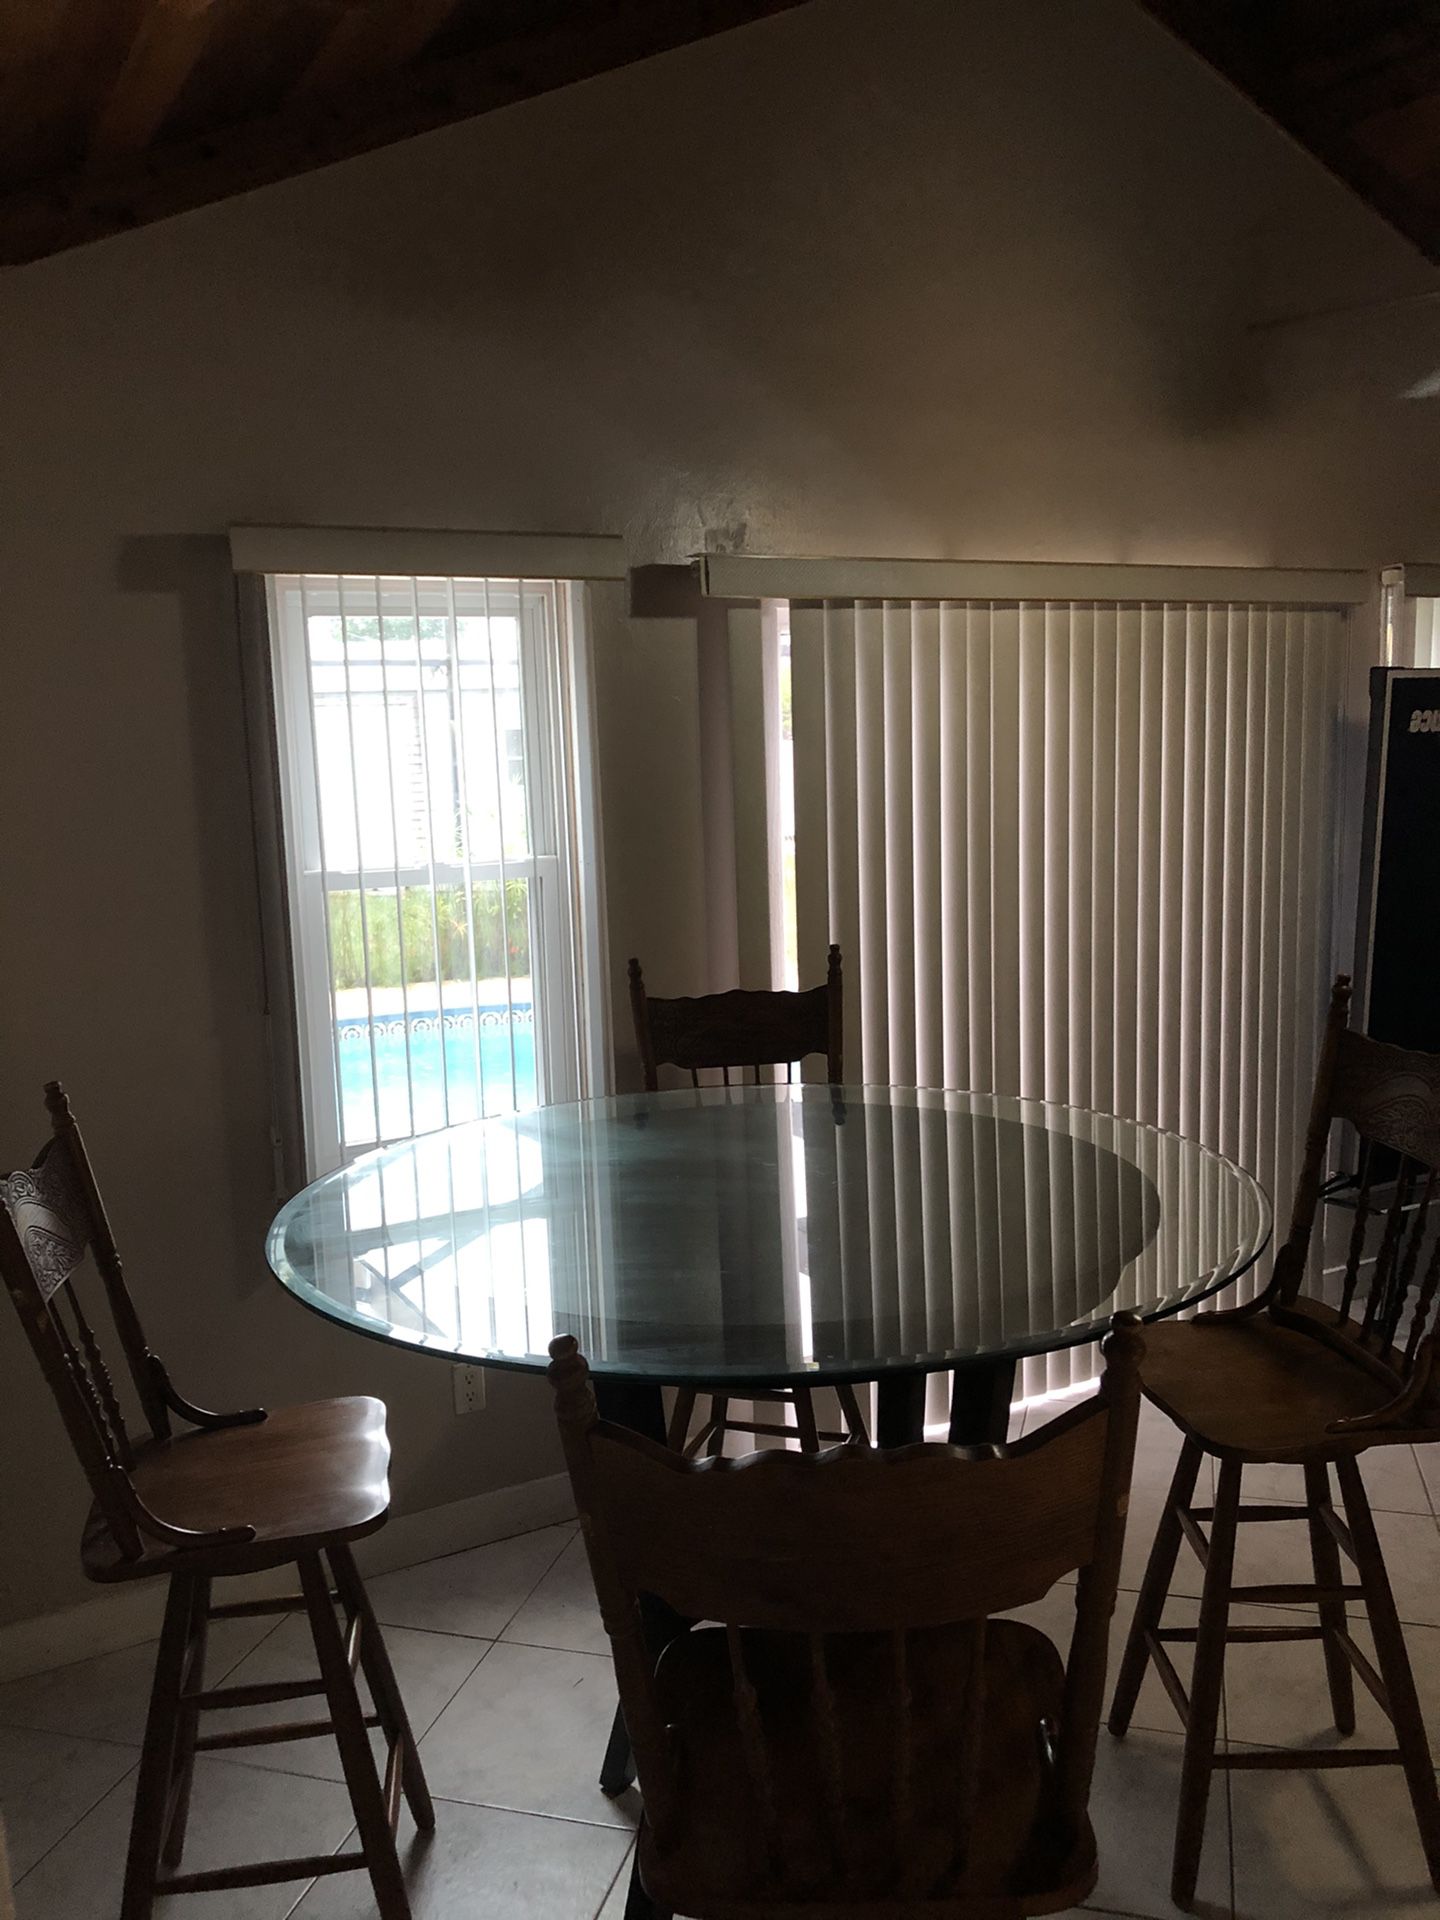 Tall Kitchen Table and bar chairs